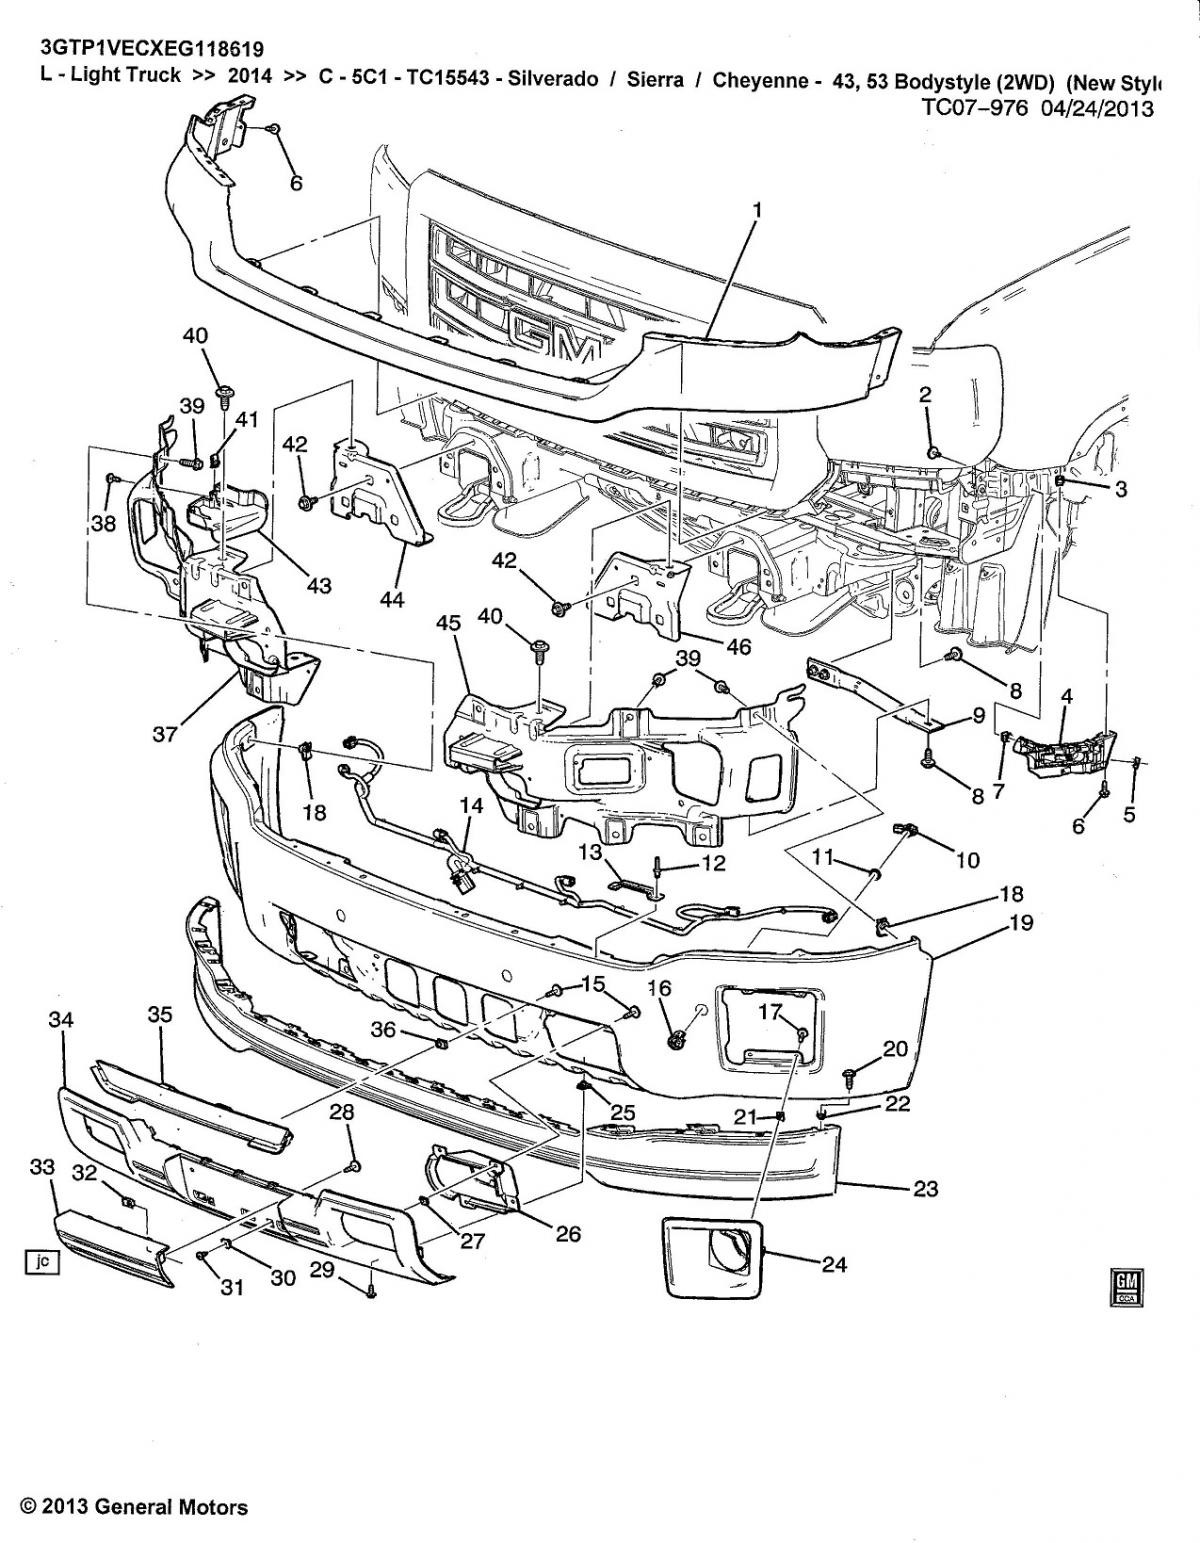 Parts diagram for gmc truck #1